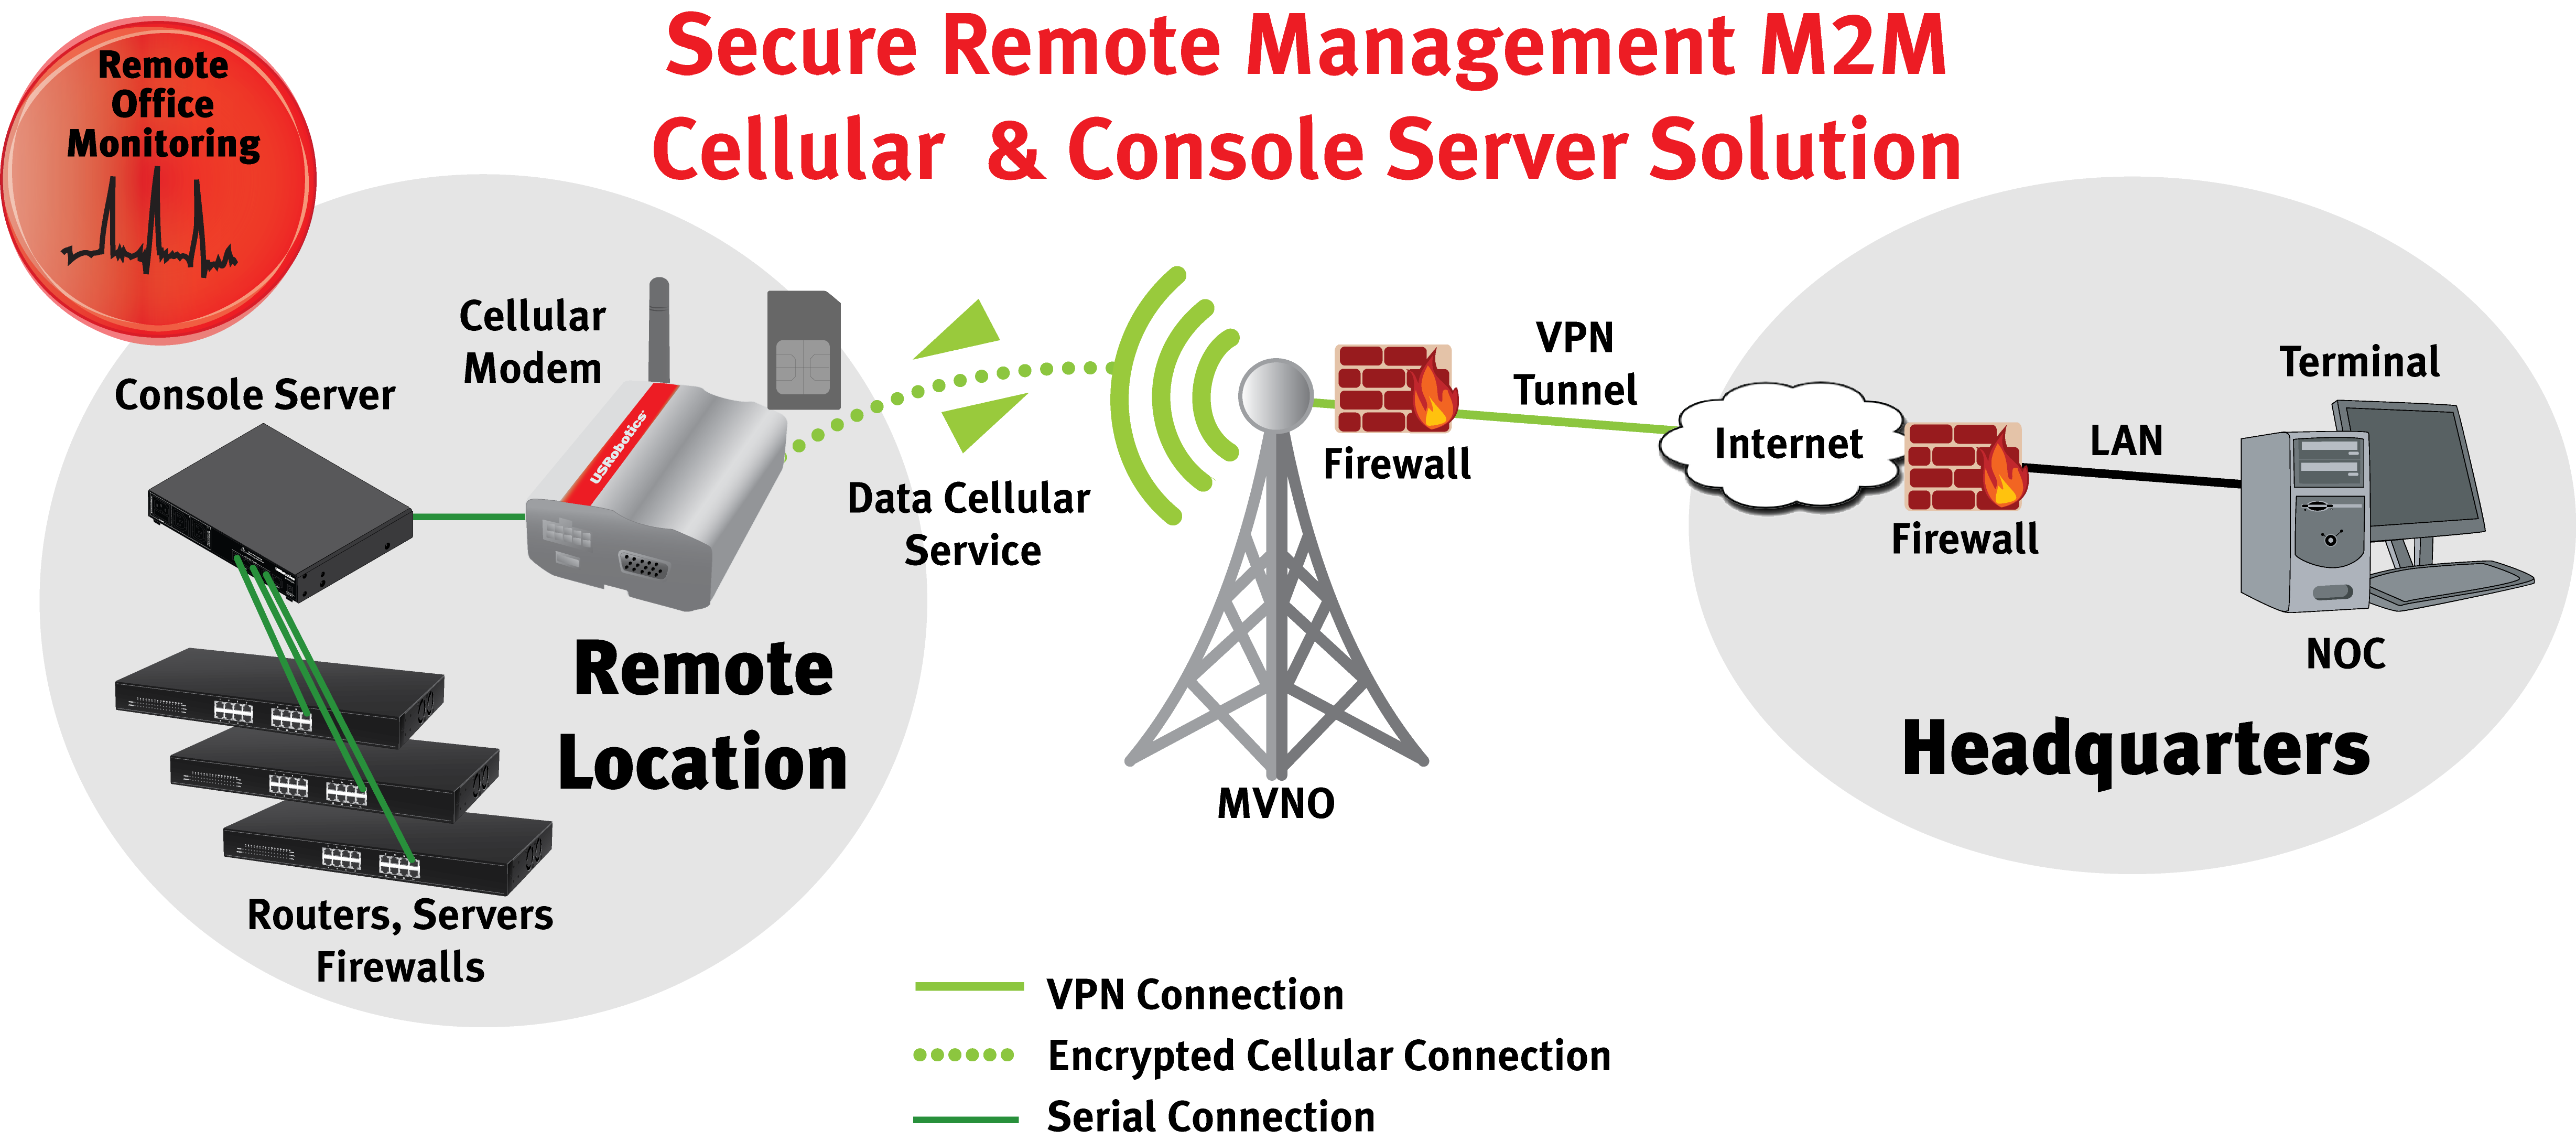 3500_diagram-remote-management-with-4204.png